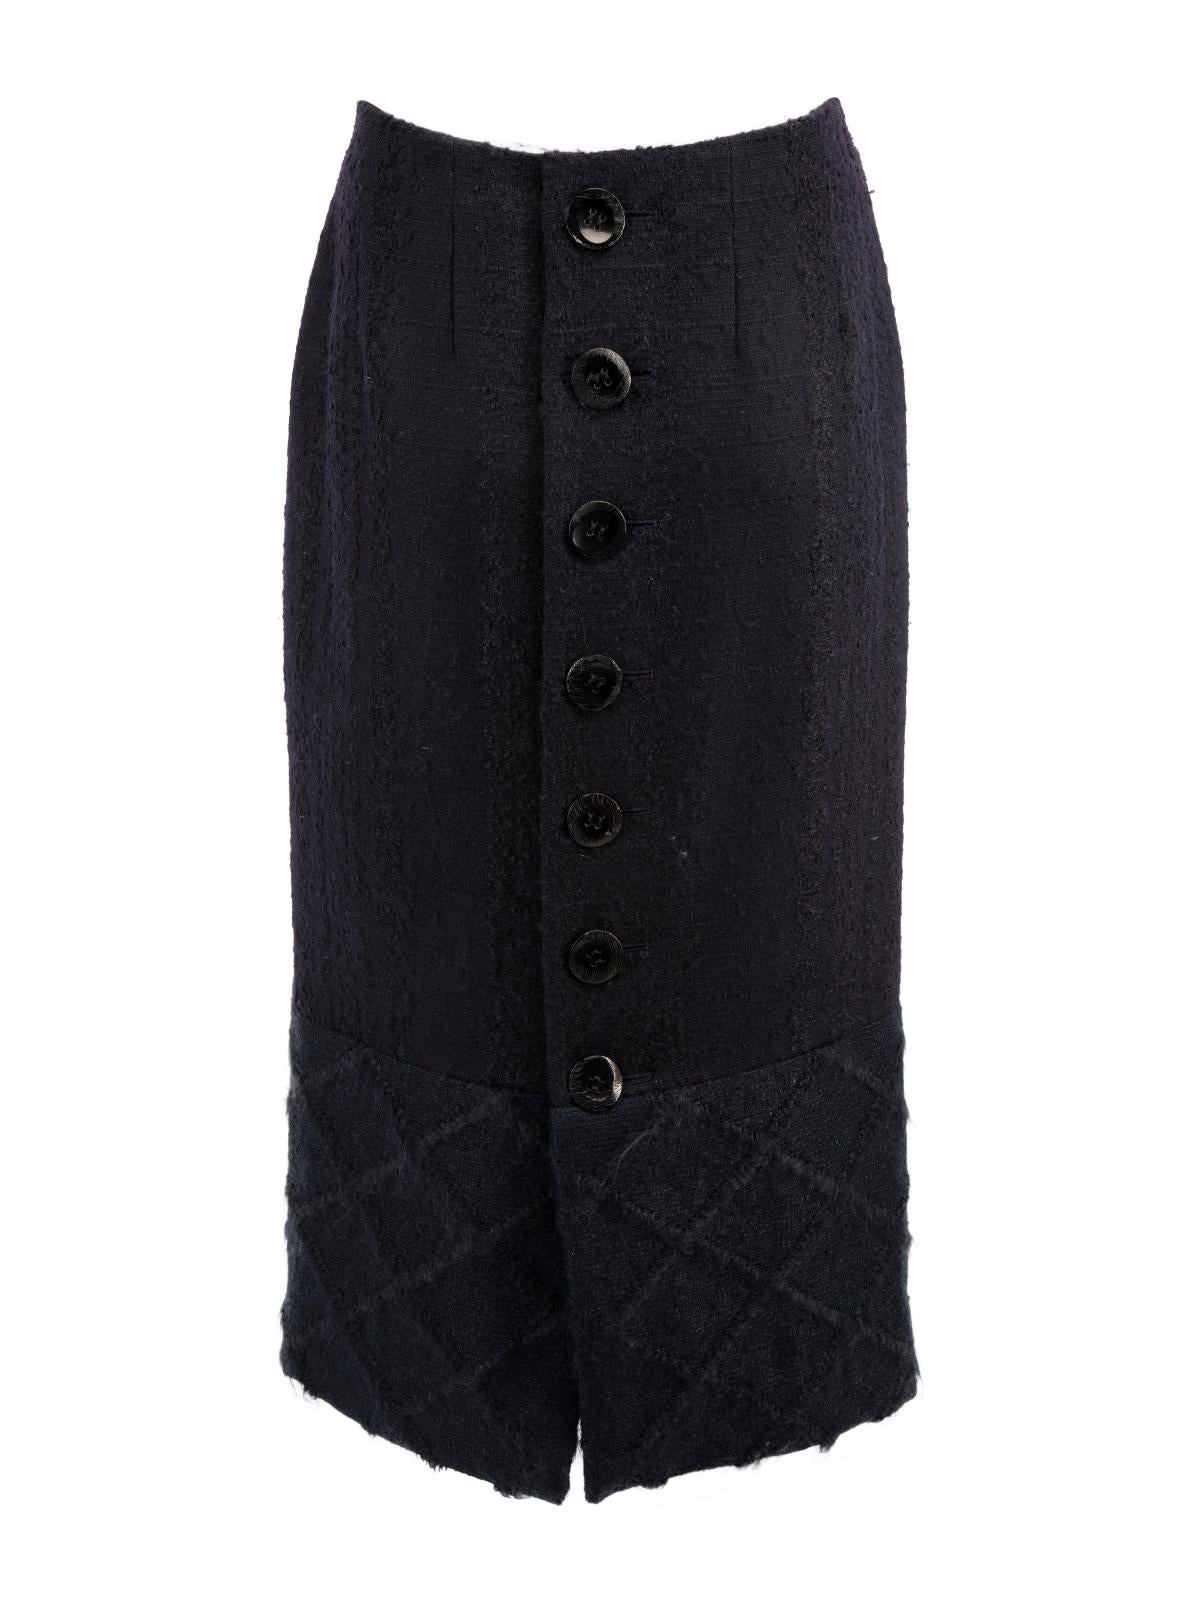 Dior Women's Navy Button Wool Pencil Skirt In Excellent Condition For Sale In London, GB